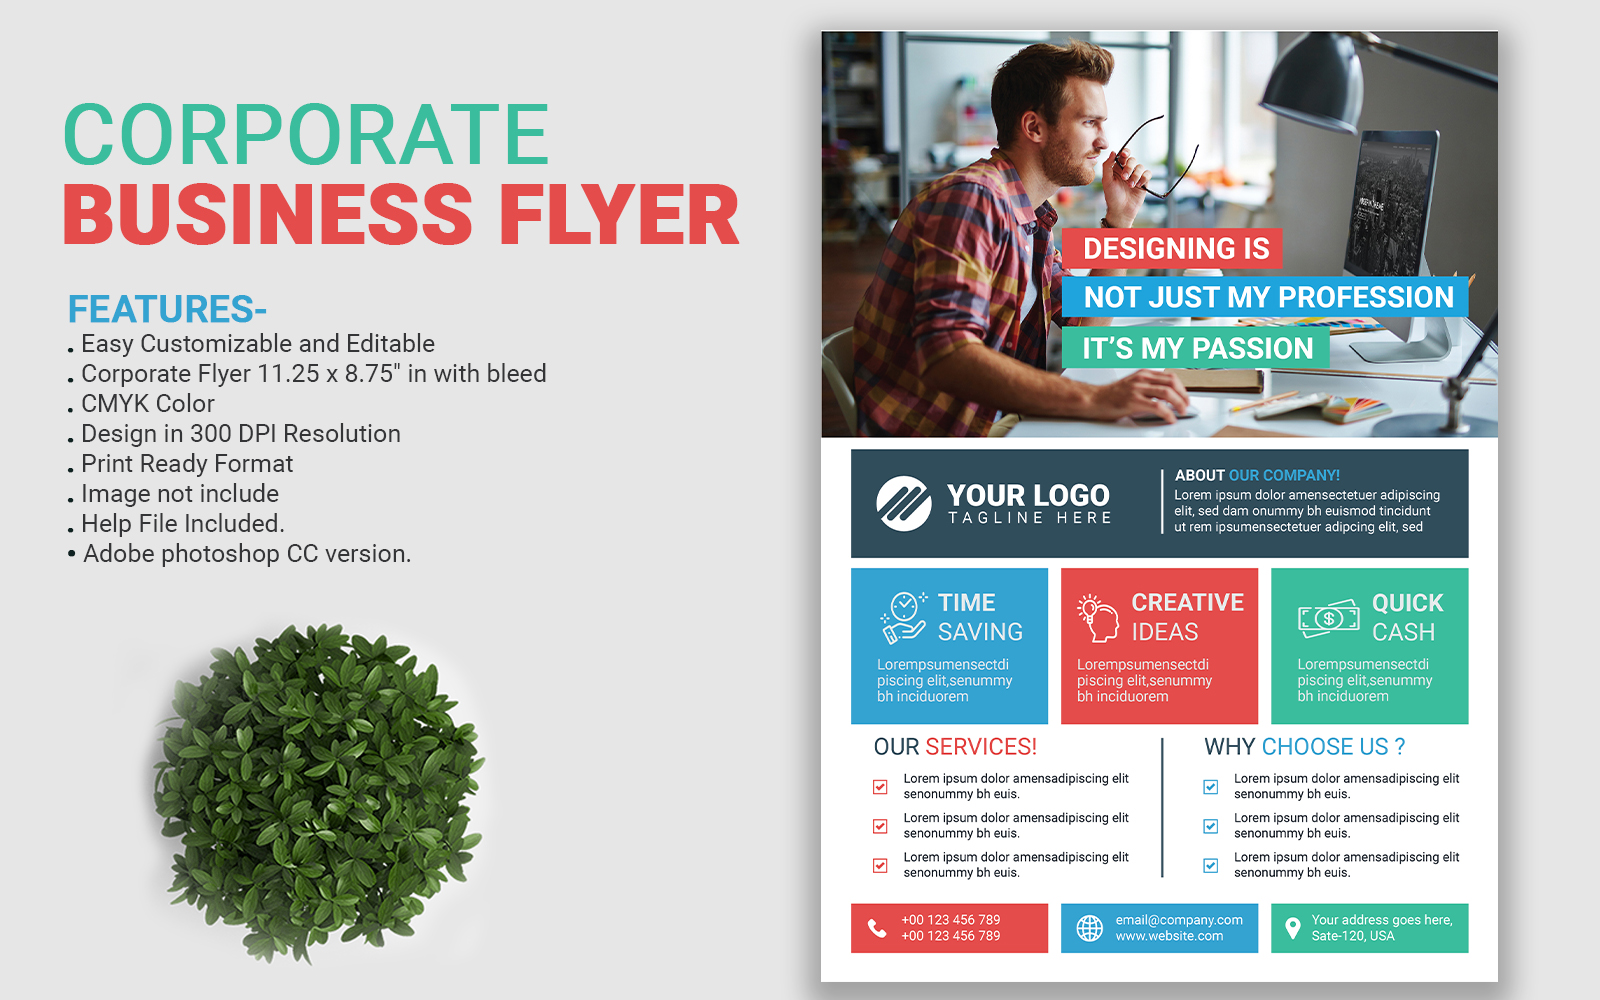 Corporate Business Flyer Template #14